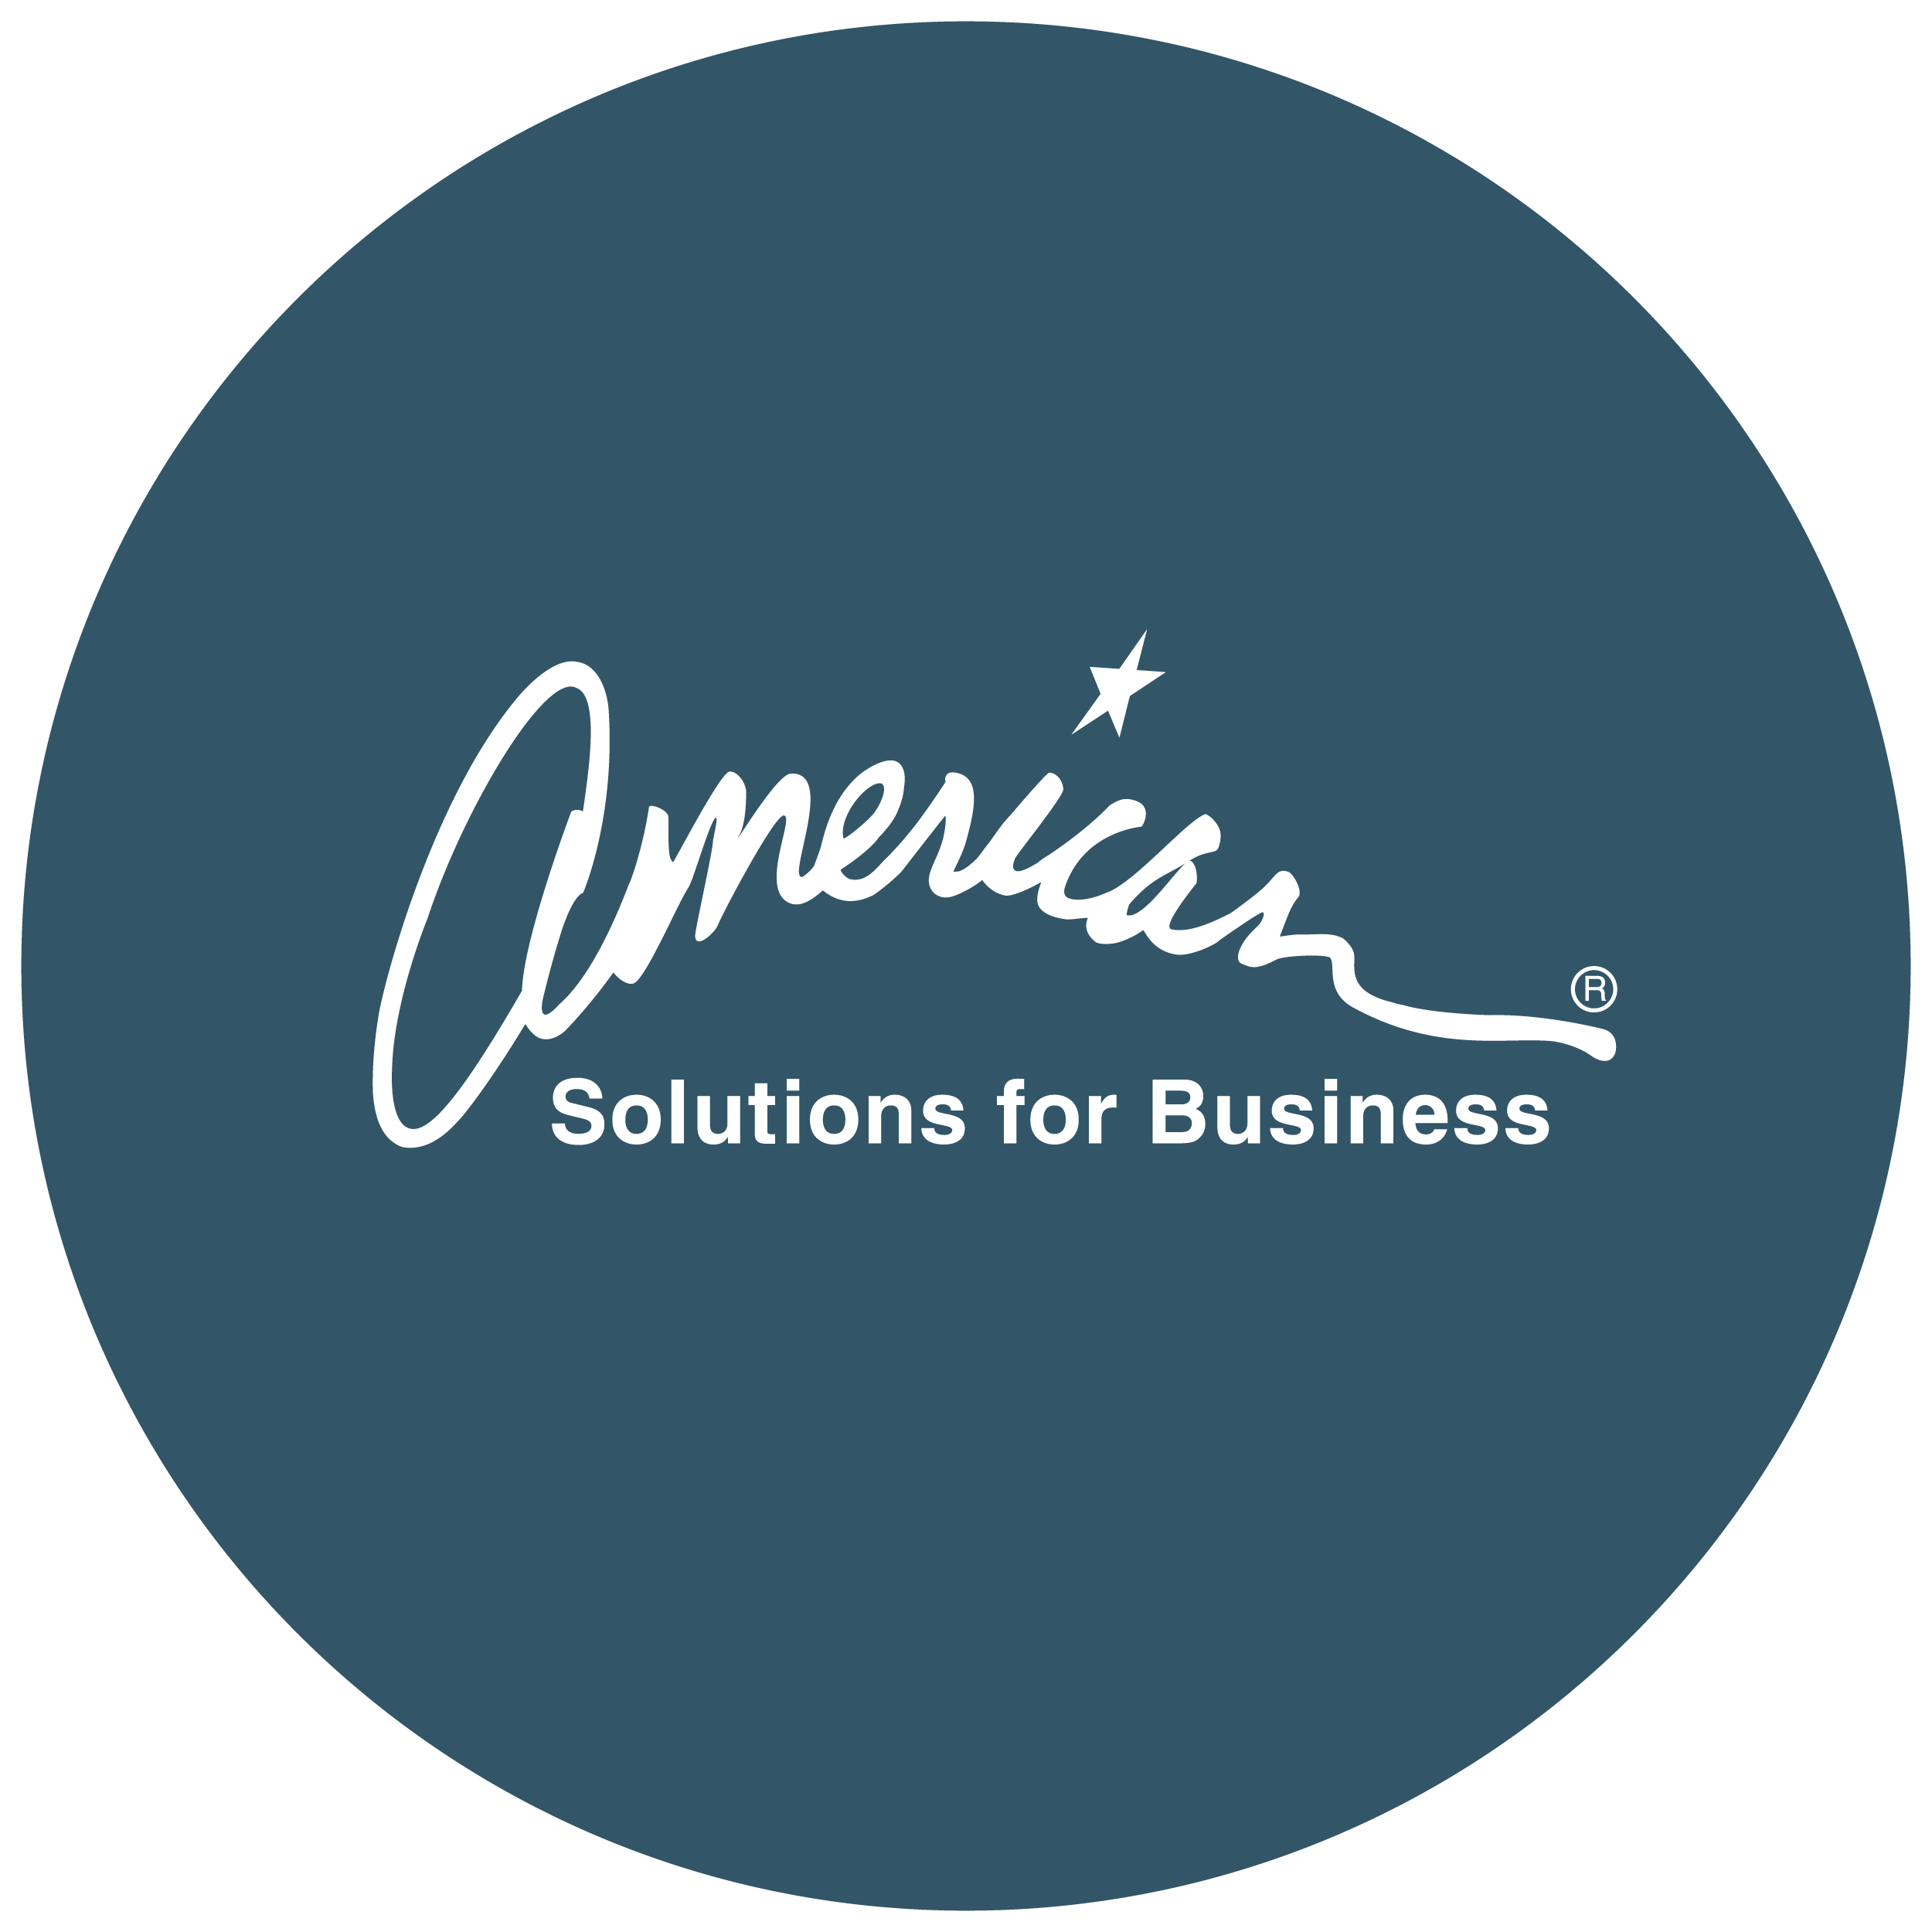 American Solutions for Business Company Logo